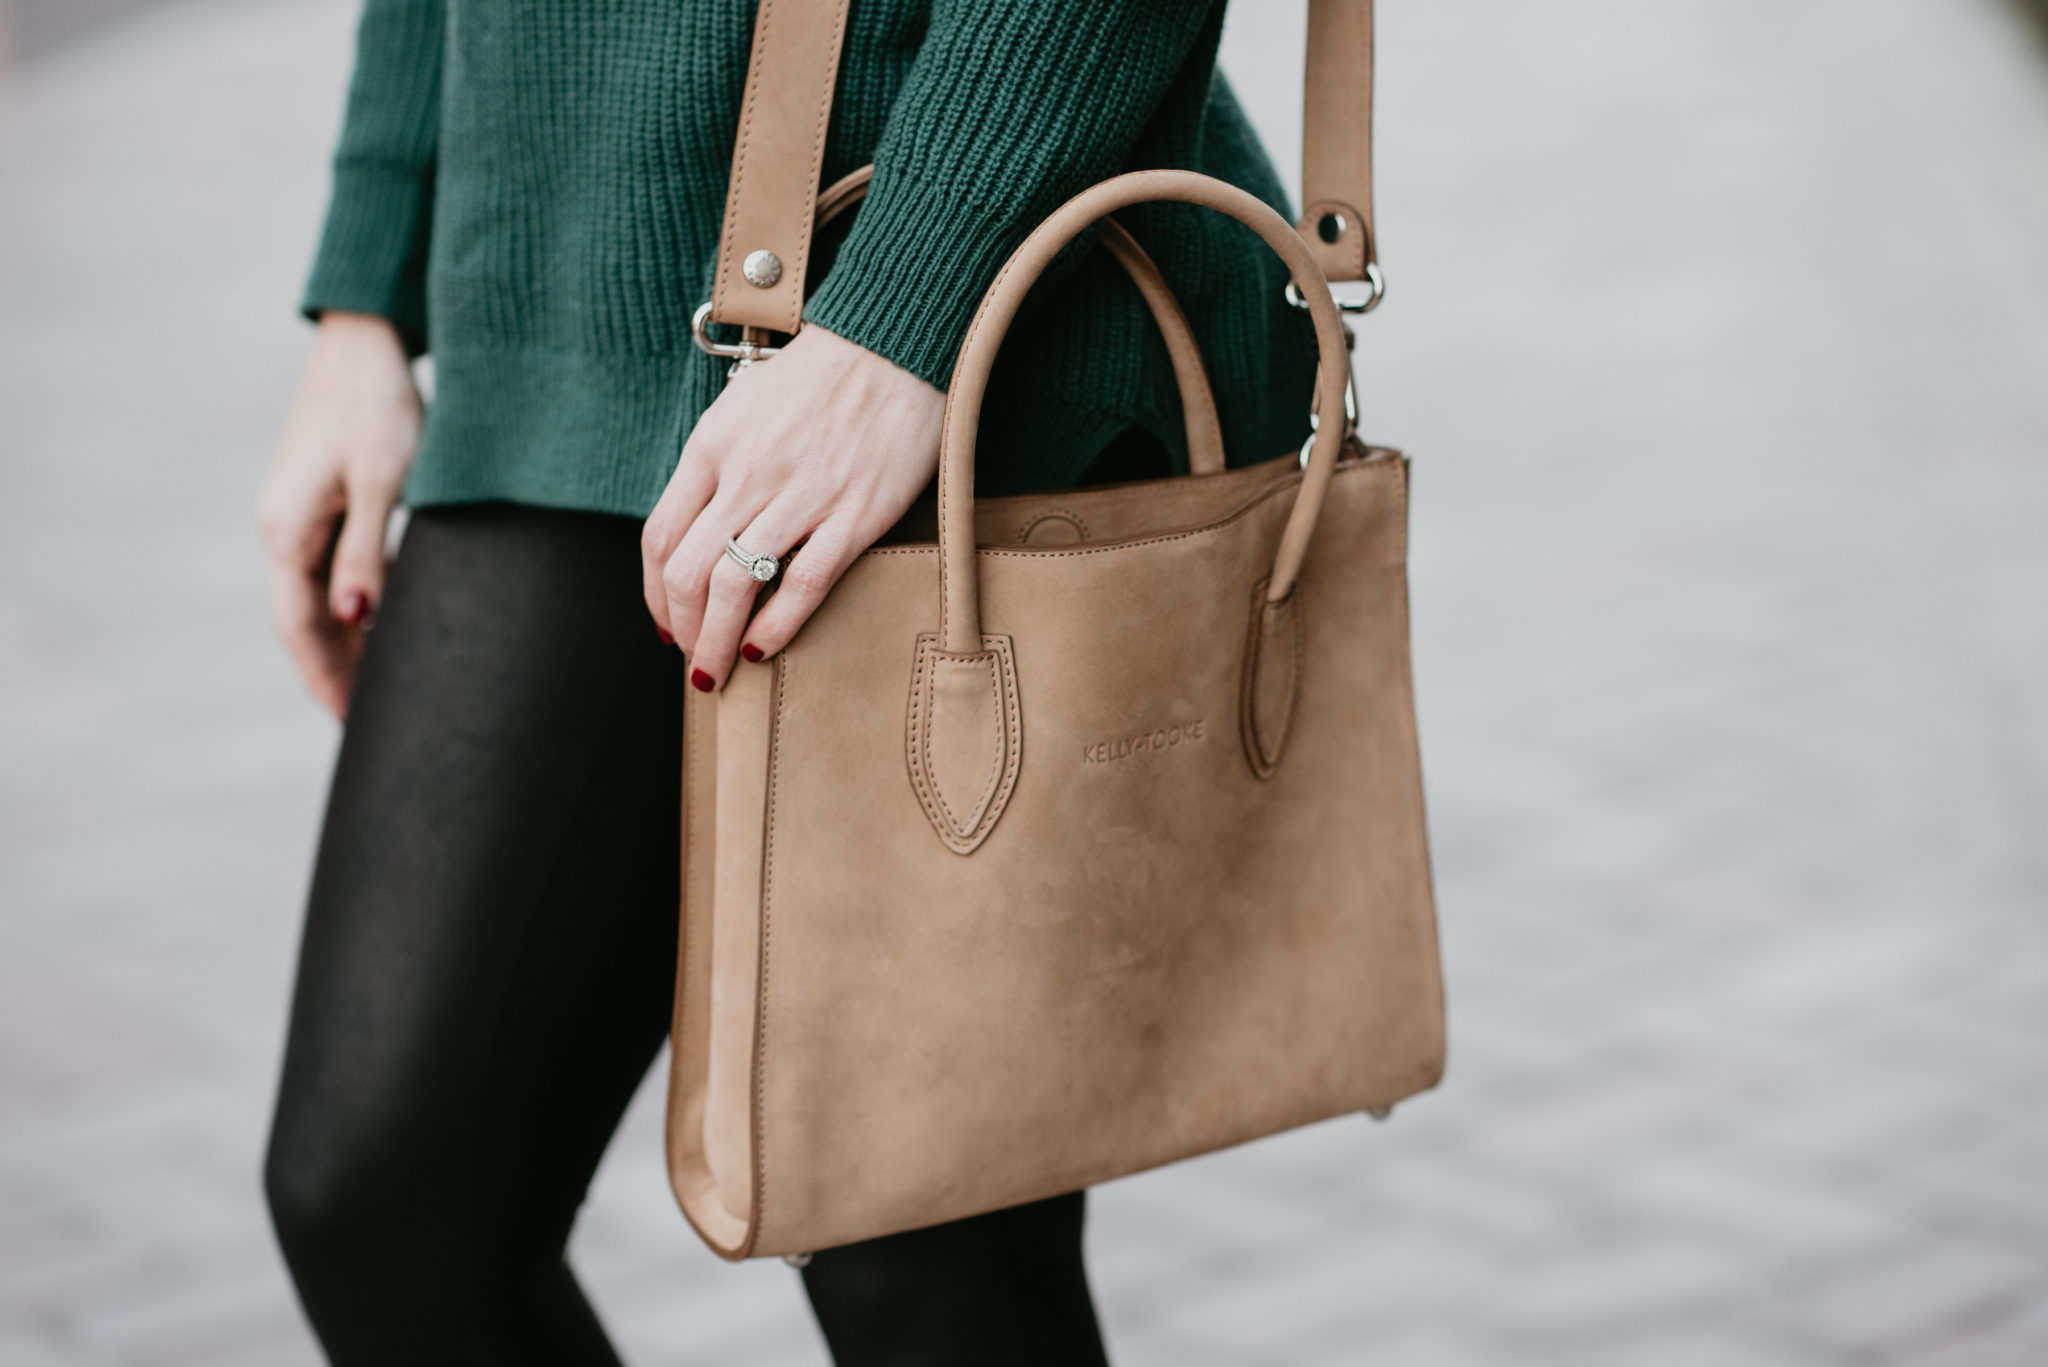 waterproof suede bag - My Favorite Winter Sweaters All Under $50 by popular Las Vegas style blogger Outfits & Outings